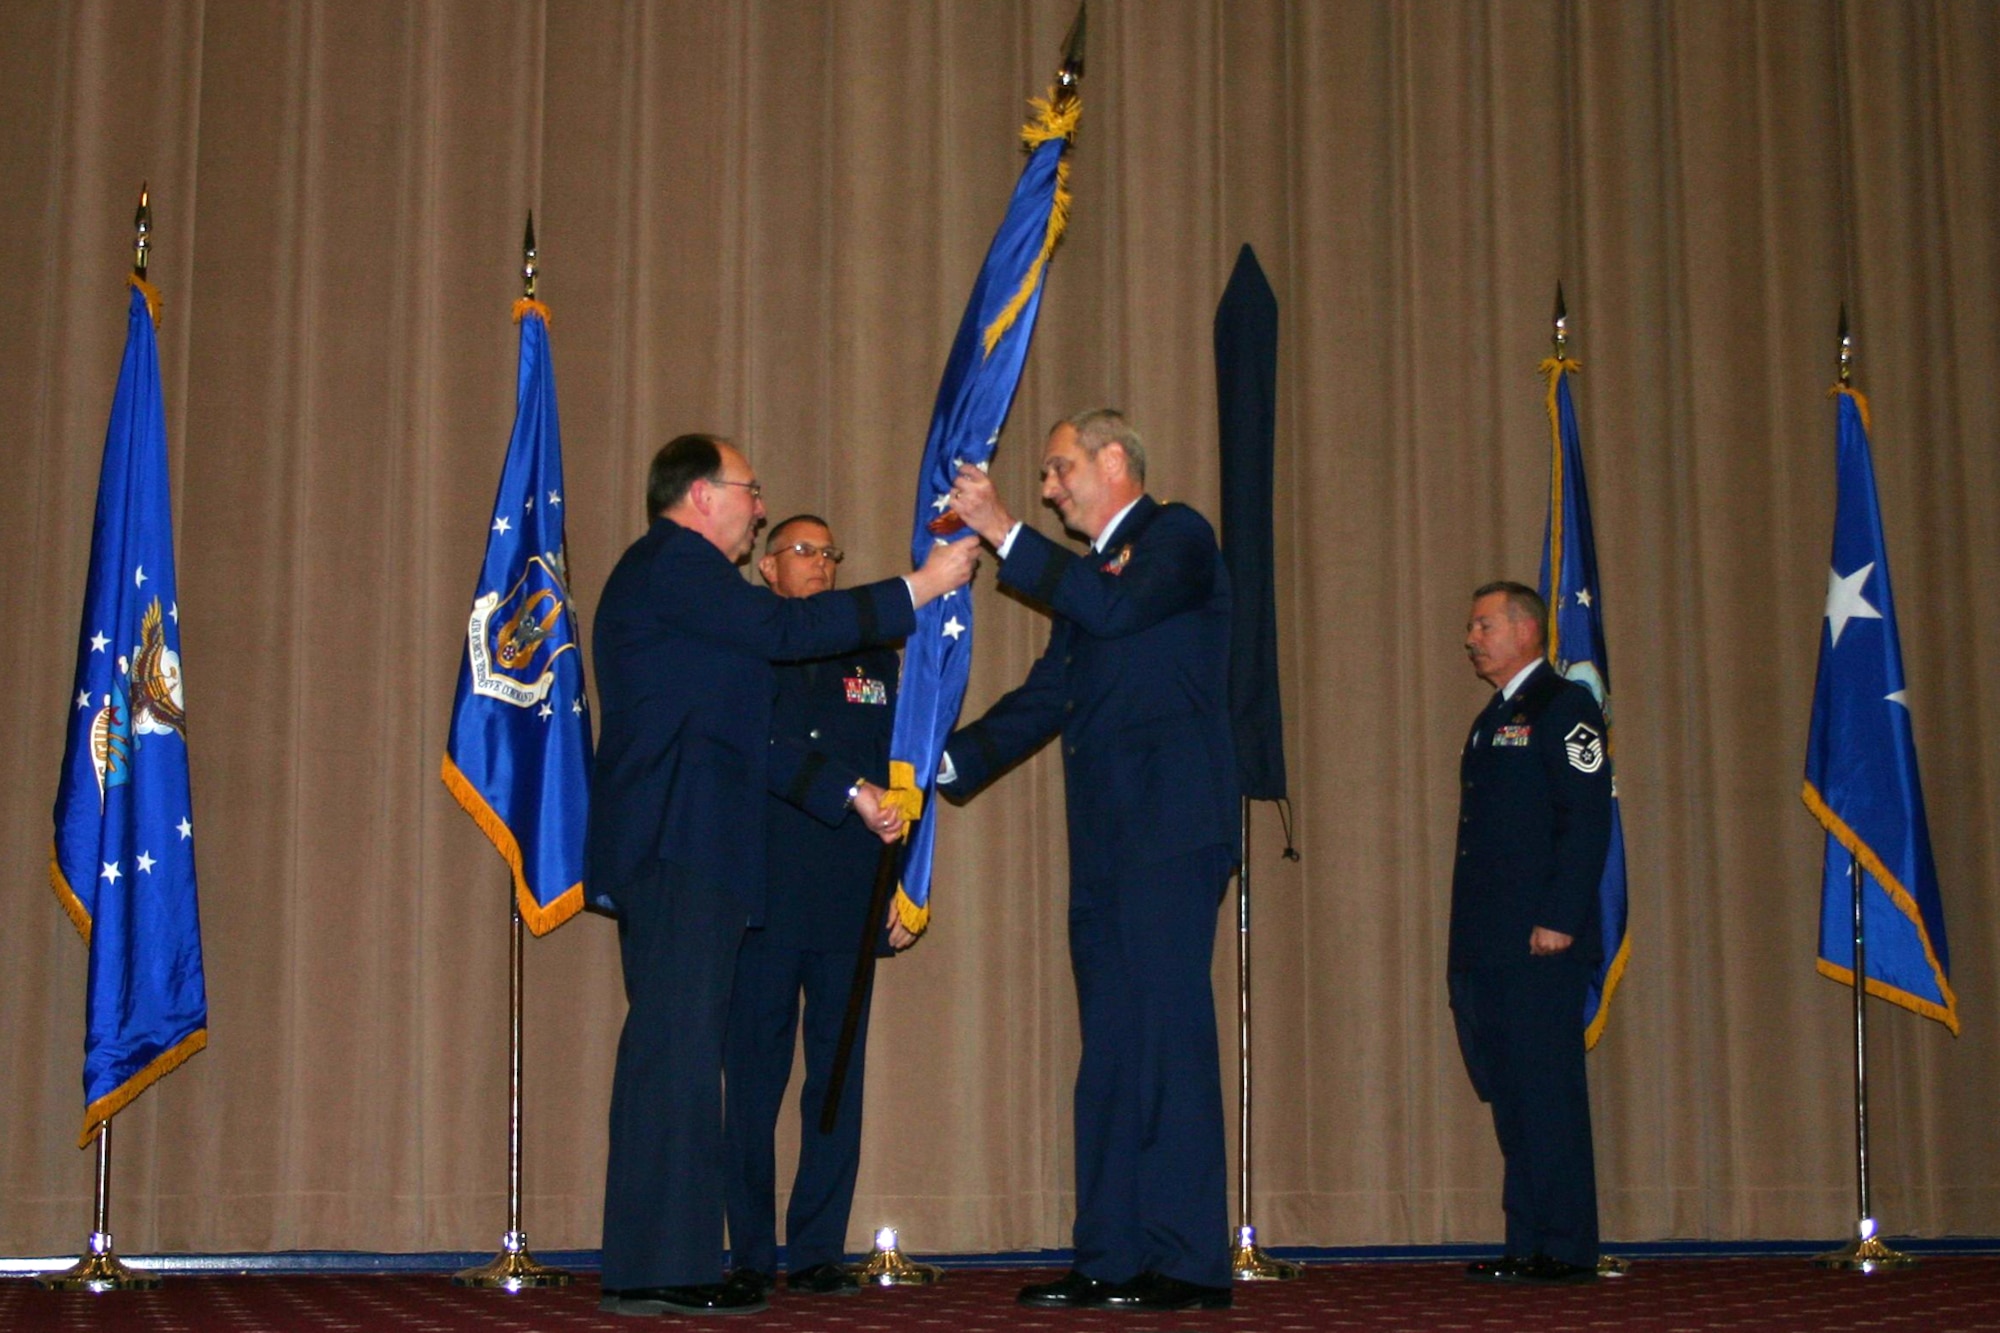 Lt. Gen. Charles E. Stenner Jr., commander of the Air Force Reserve Command, presents the 307th Bomb Wing flag to Brig. Gen. John J. Mooney III, during reactivation ceremonies at Barksdale Air Force Base, La., Jan. 8, 2011. During the same ceremonies, the 917th Operations Group was re-designated as the 917th Fighter Group and the 917th Wing was deactivated. (U.S. Air Force photo/Staff Sgt. Travis Robertson)